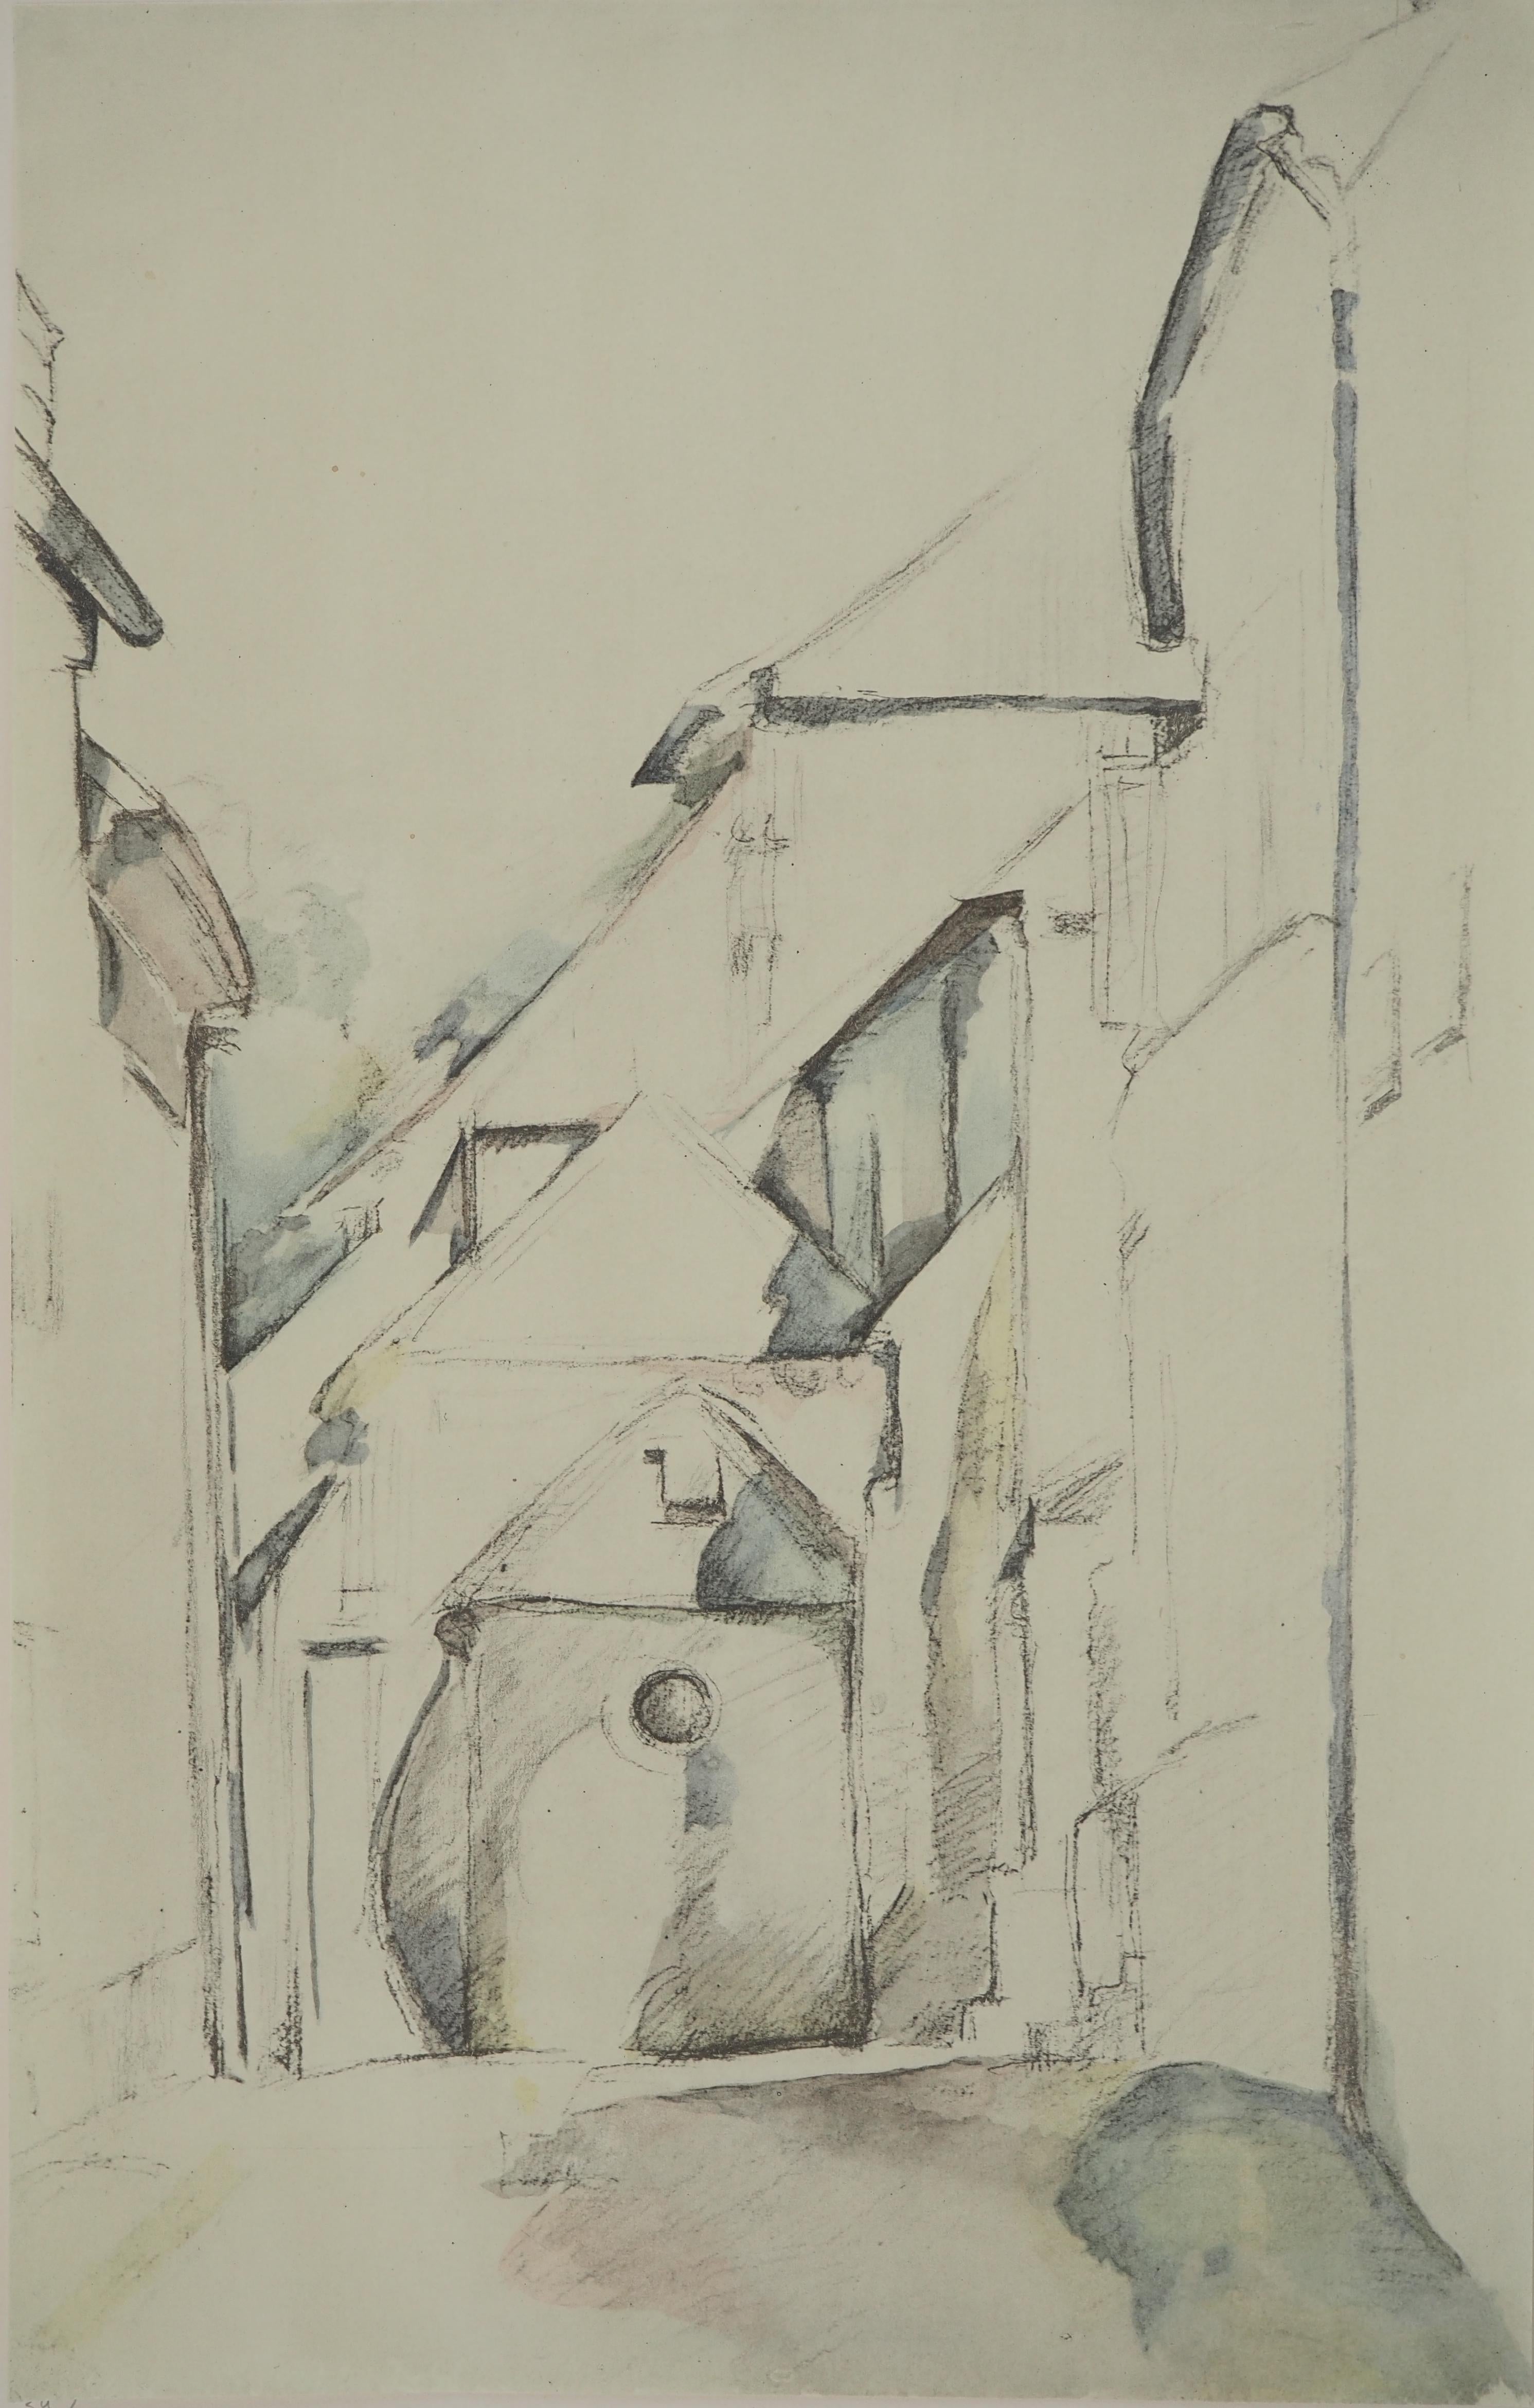 Small Village in France, near the Church - Lithograph, 1971 - Print by Paul Cézanne